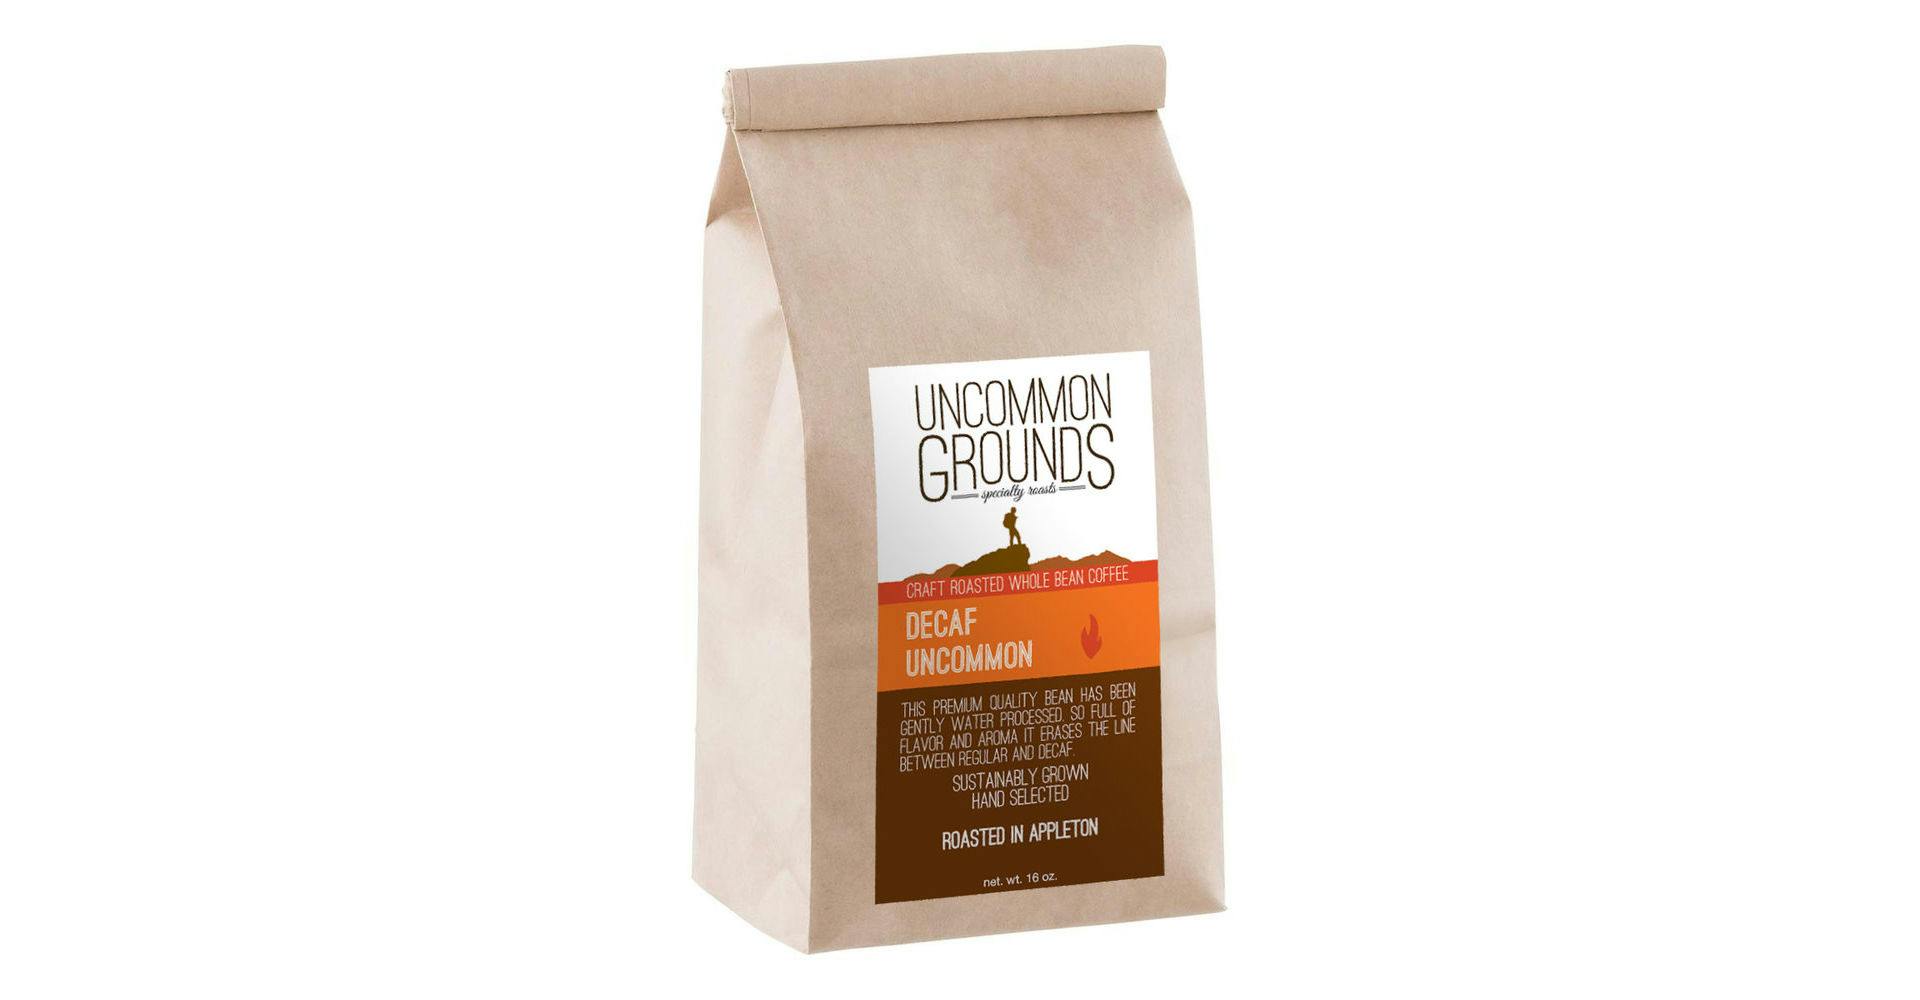 Uncommon Grounds Decaf (1# Bag) from Breadsmith - Van Roy Rd. in Appleton, WI